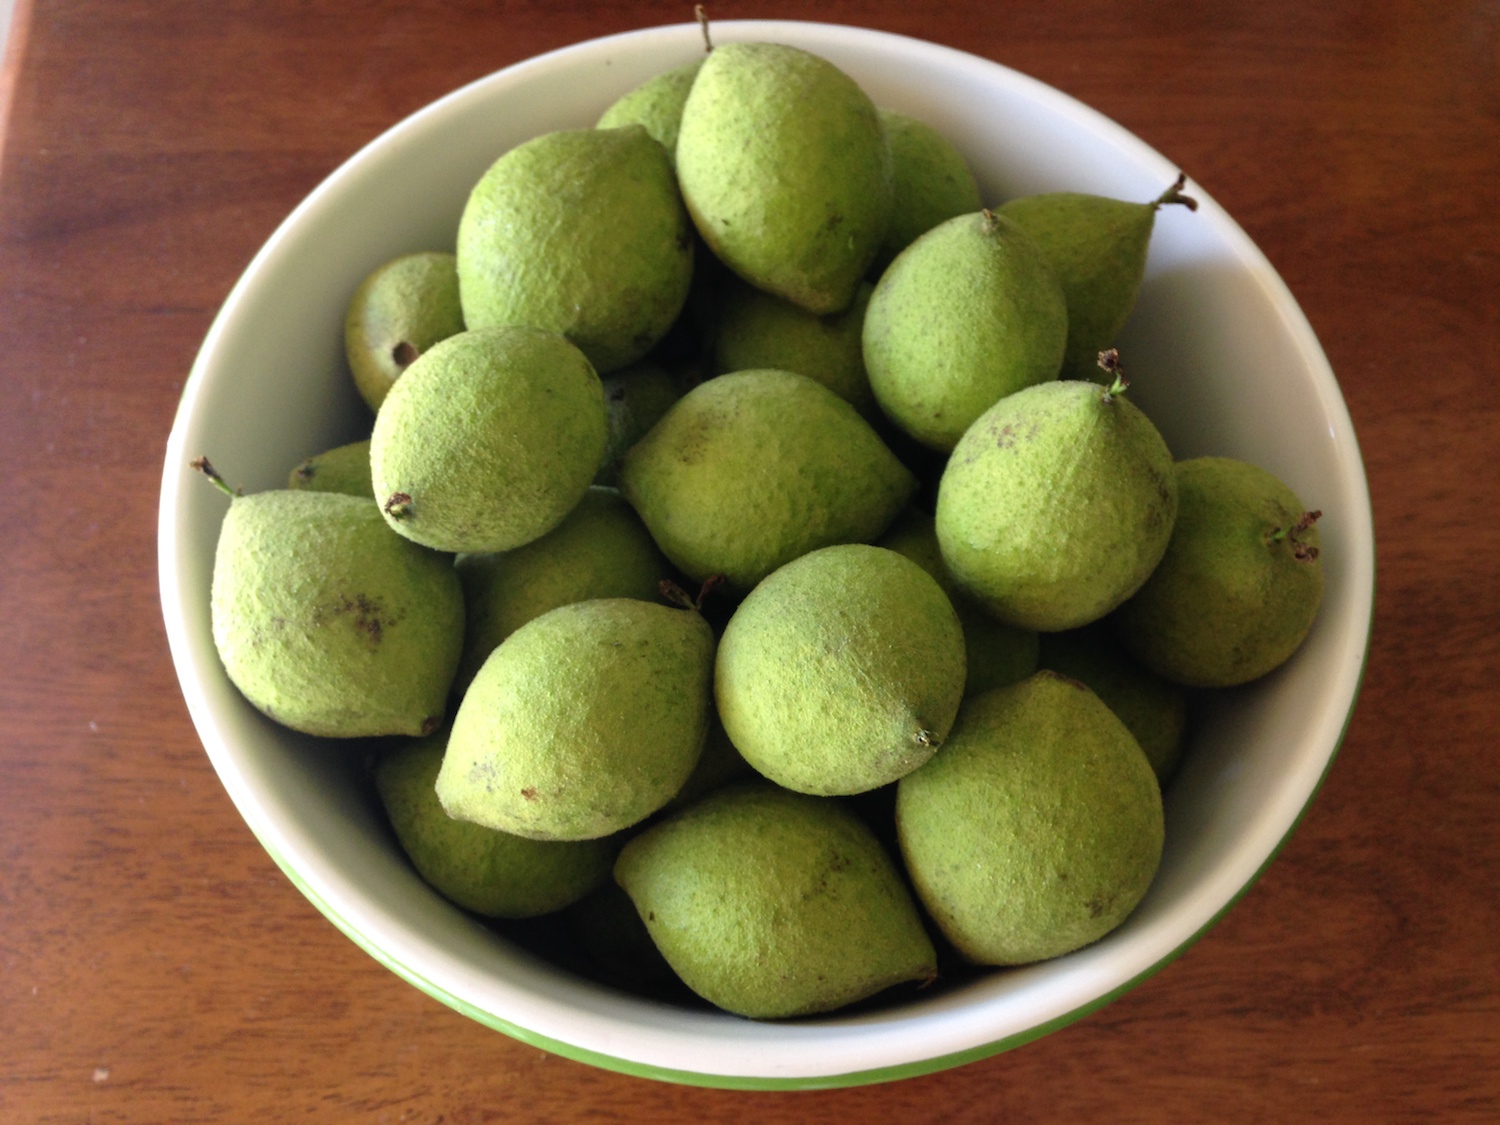 Unripe walnuts ready to be made into nocino.